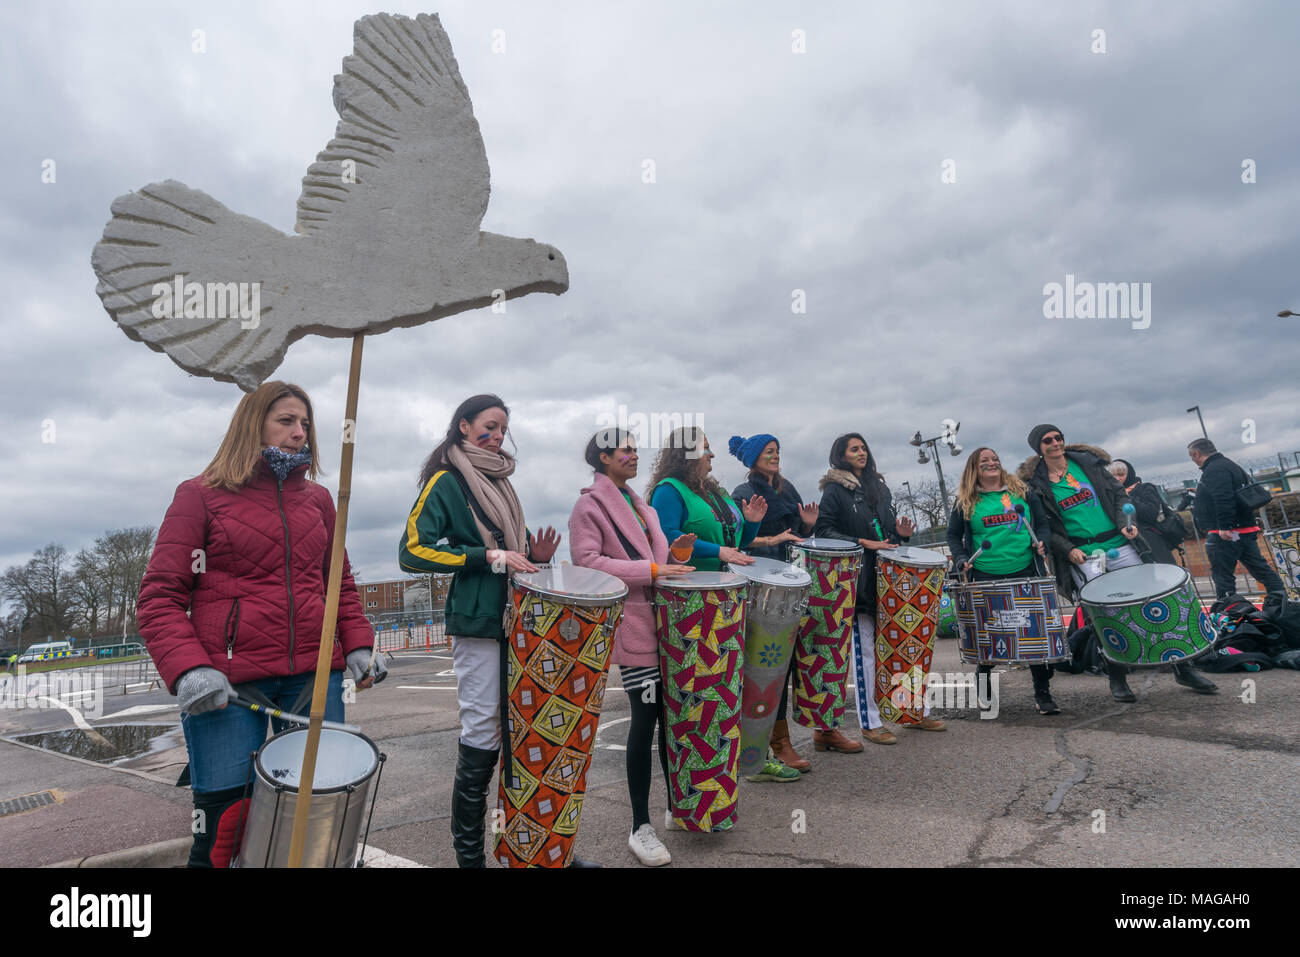 Aldermaston, UK. 1st Apr, 2018. Samba band TRibo plays as CND celebrates the 60th anniversary of the first Aldermaston march which mobilised thousands against the Bomb and shaped radical protest for generations. Their protest outside the Atomic Weapons Establishment included a giant, iconic peace symbol, speeches, including by some of those on the original march, singing and drumming and celebrated the UN treaty banning nuclear weapons. Campaign to abolish nuclear weapons. Credit: Peter Marshall/Alamy Live News Stock Photo